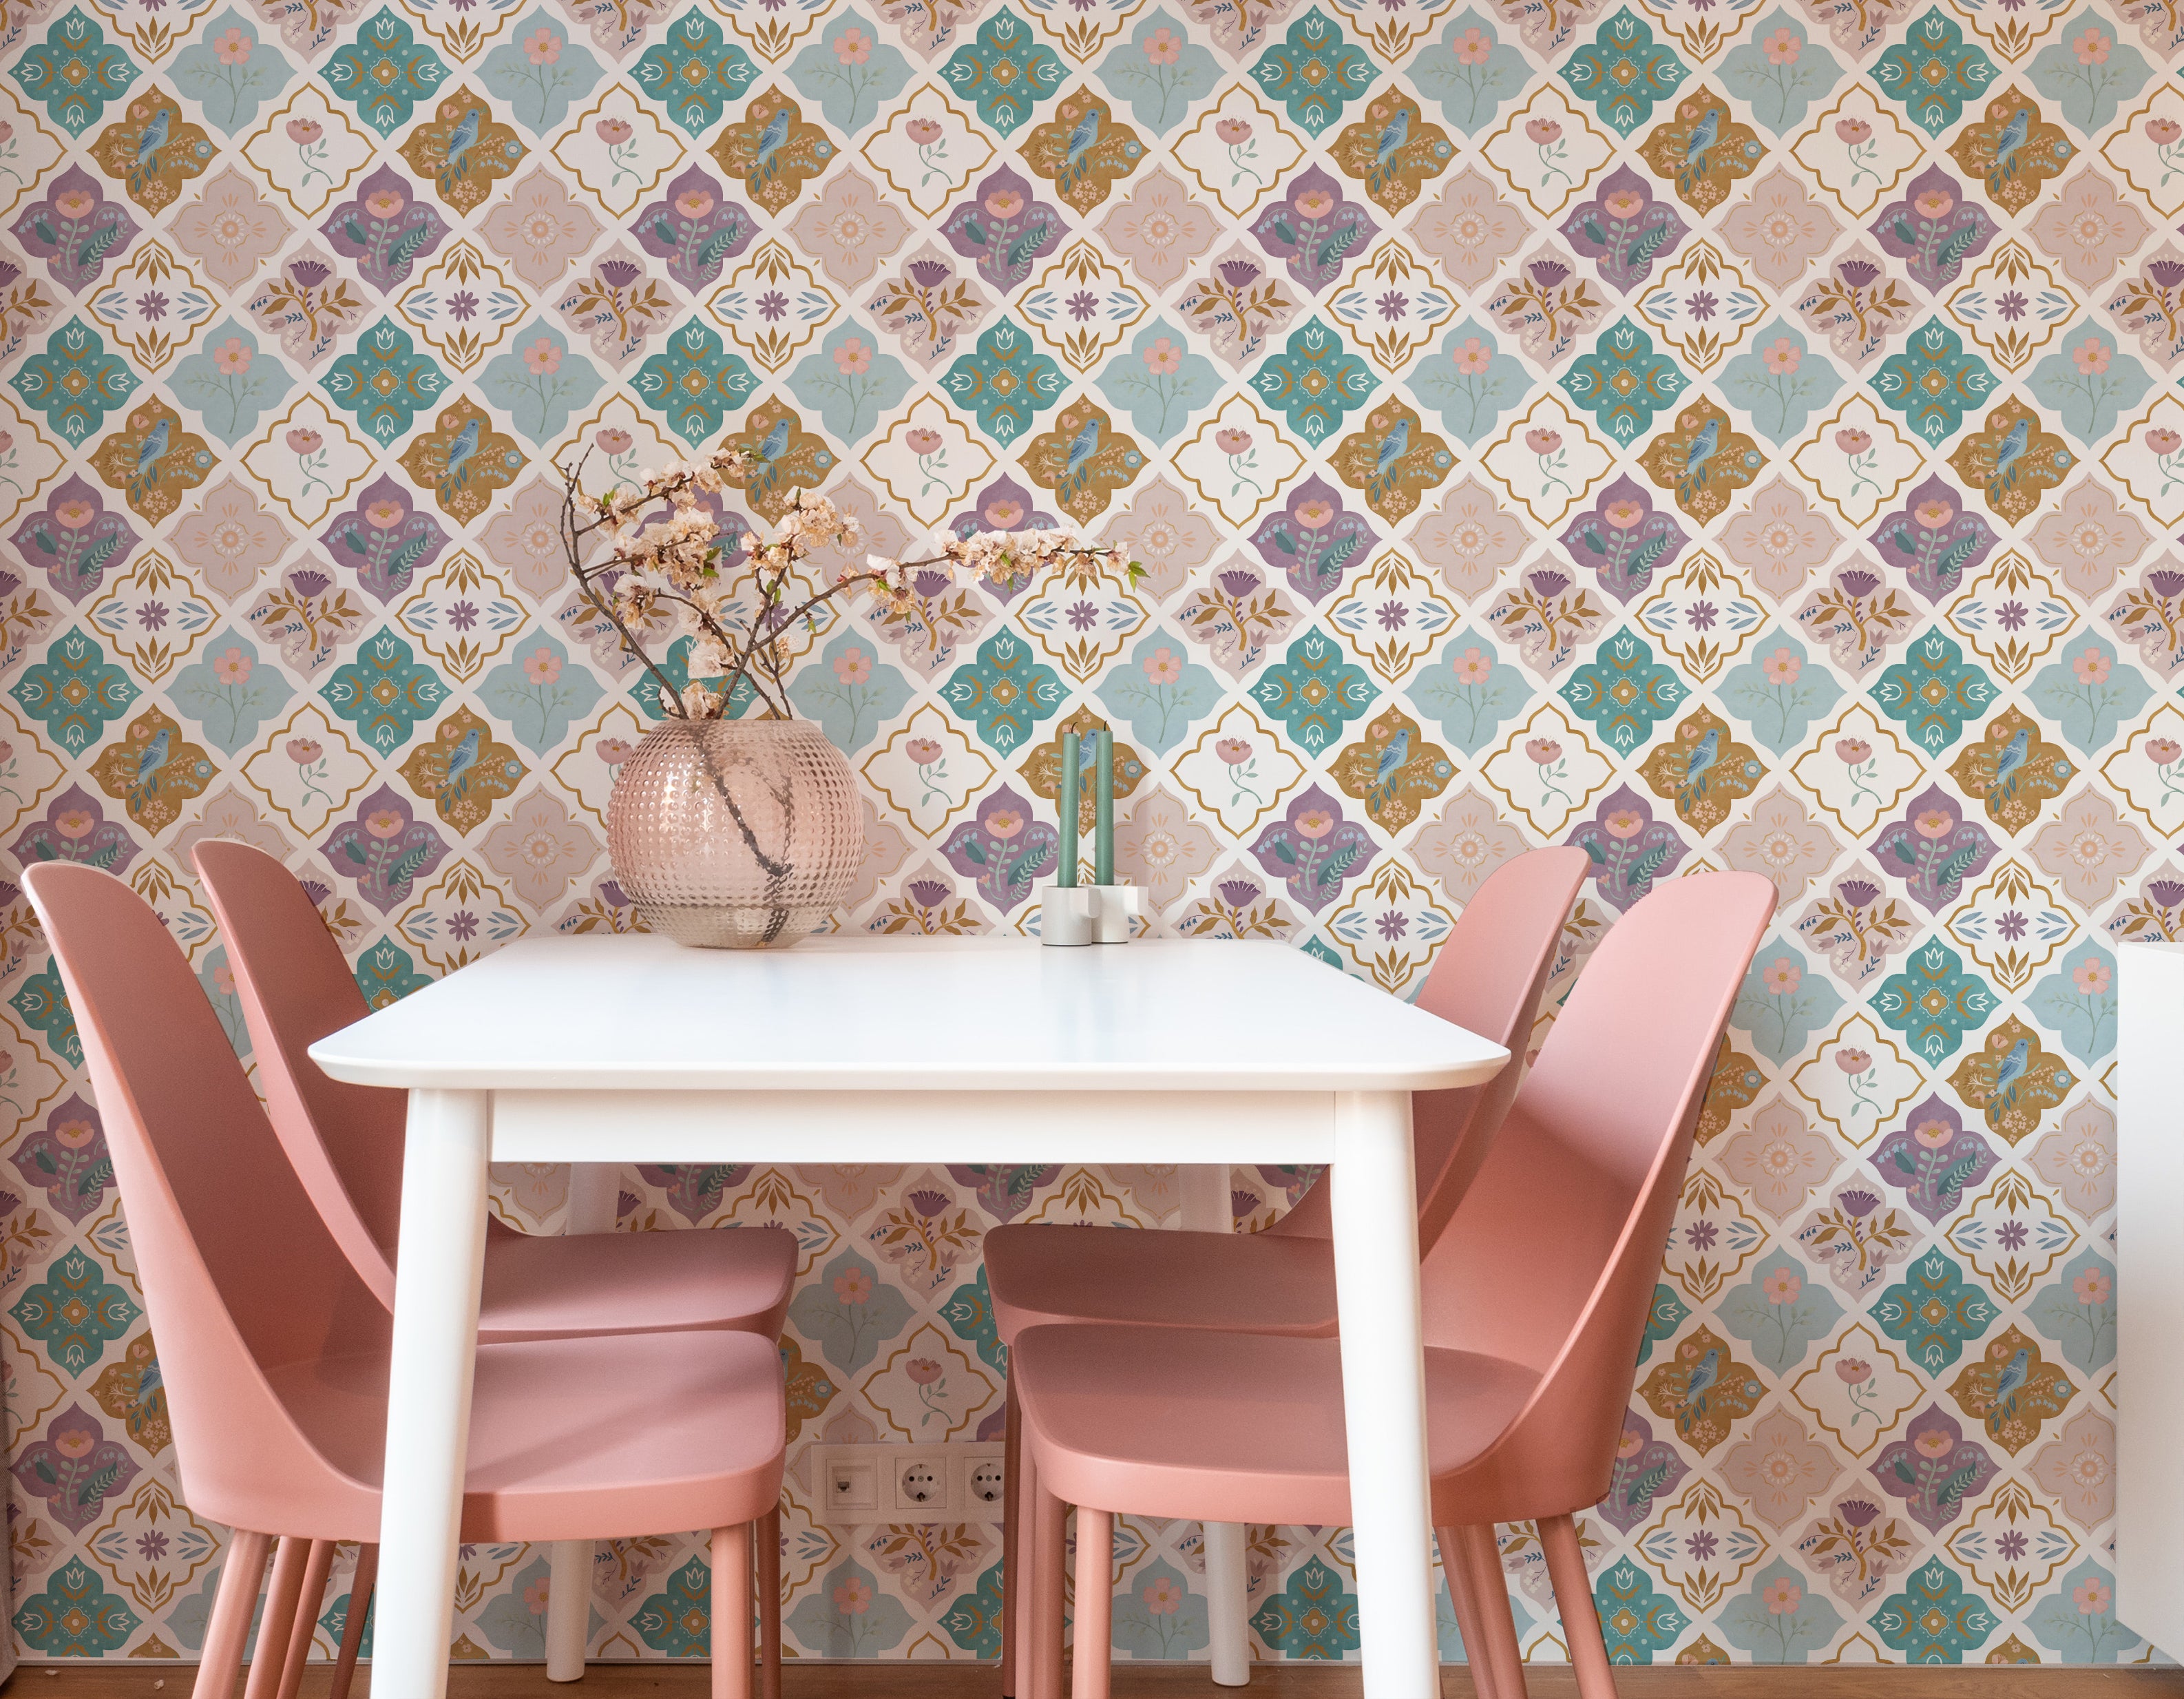 Modern dining area showcasing walls adorned with floral mosaic wallpaper, presenting a symmetrical design of blooms and avian motifs in soft hues, complemented by minimalist furniture.